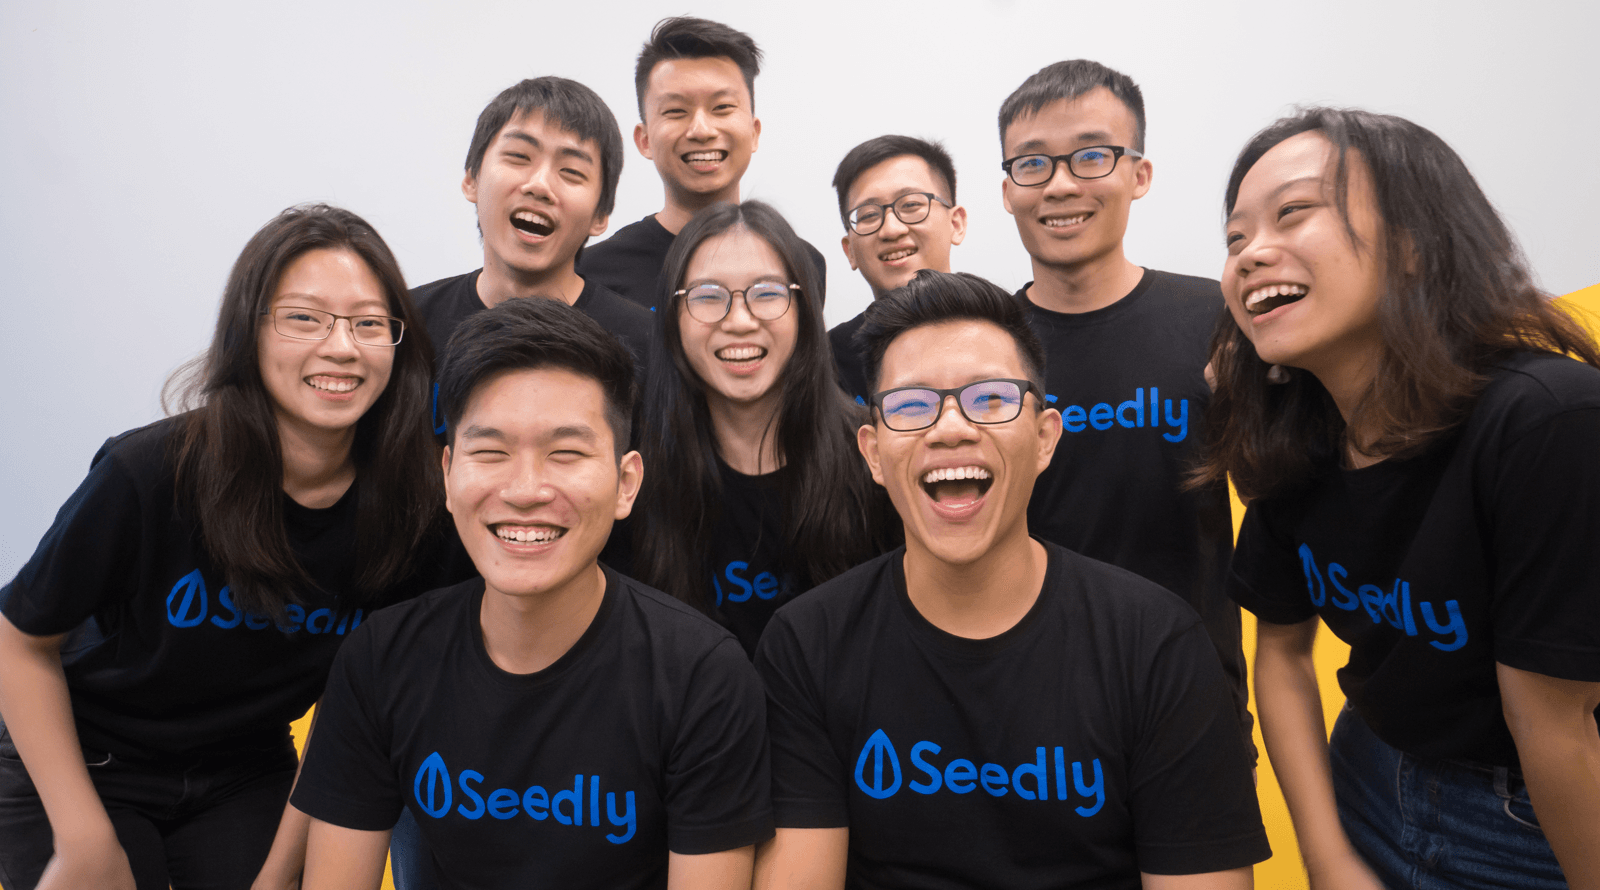 The Seedly Team